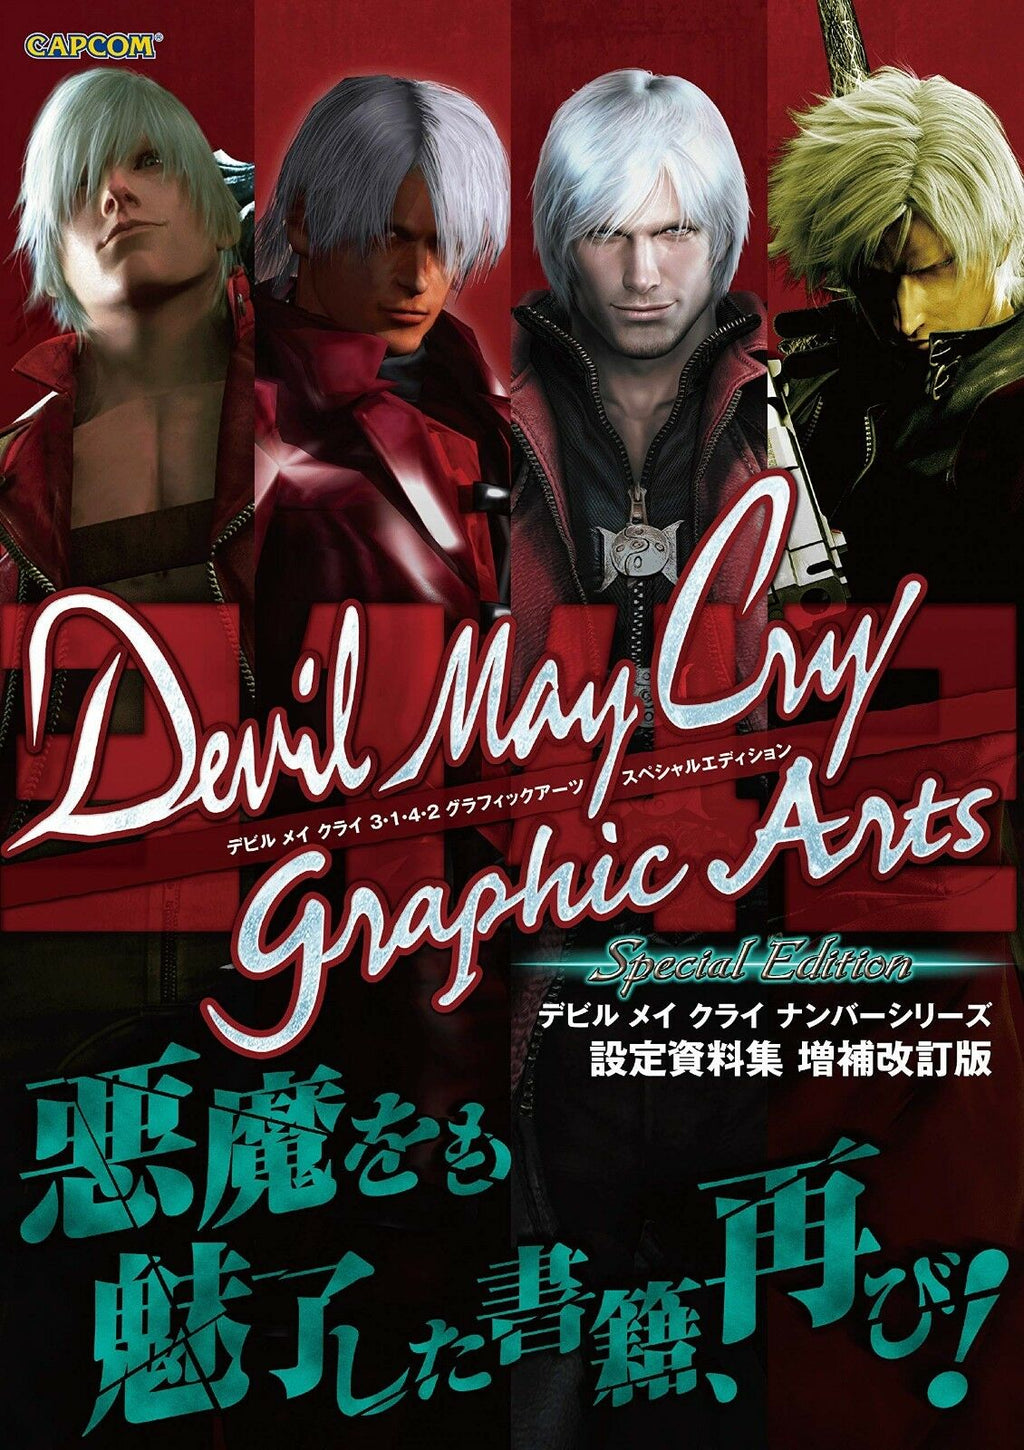 NEW Devil May Cry 3 1 4 2 Graphic Arts Special Edition | Japan Game Art Book